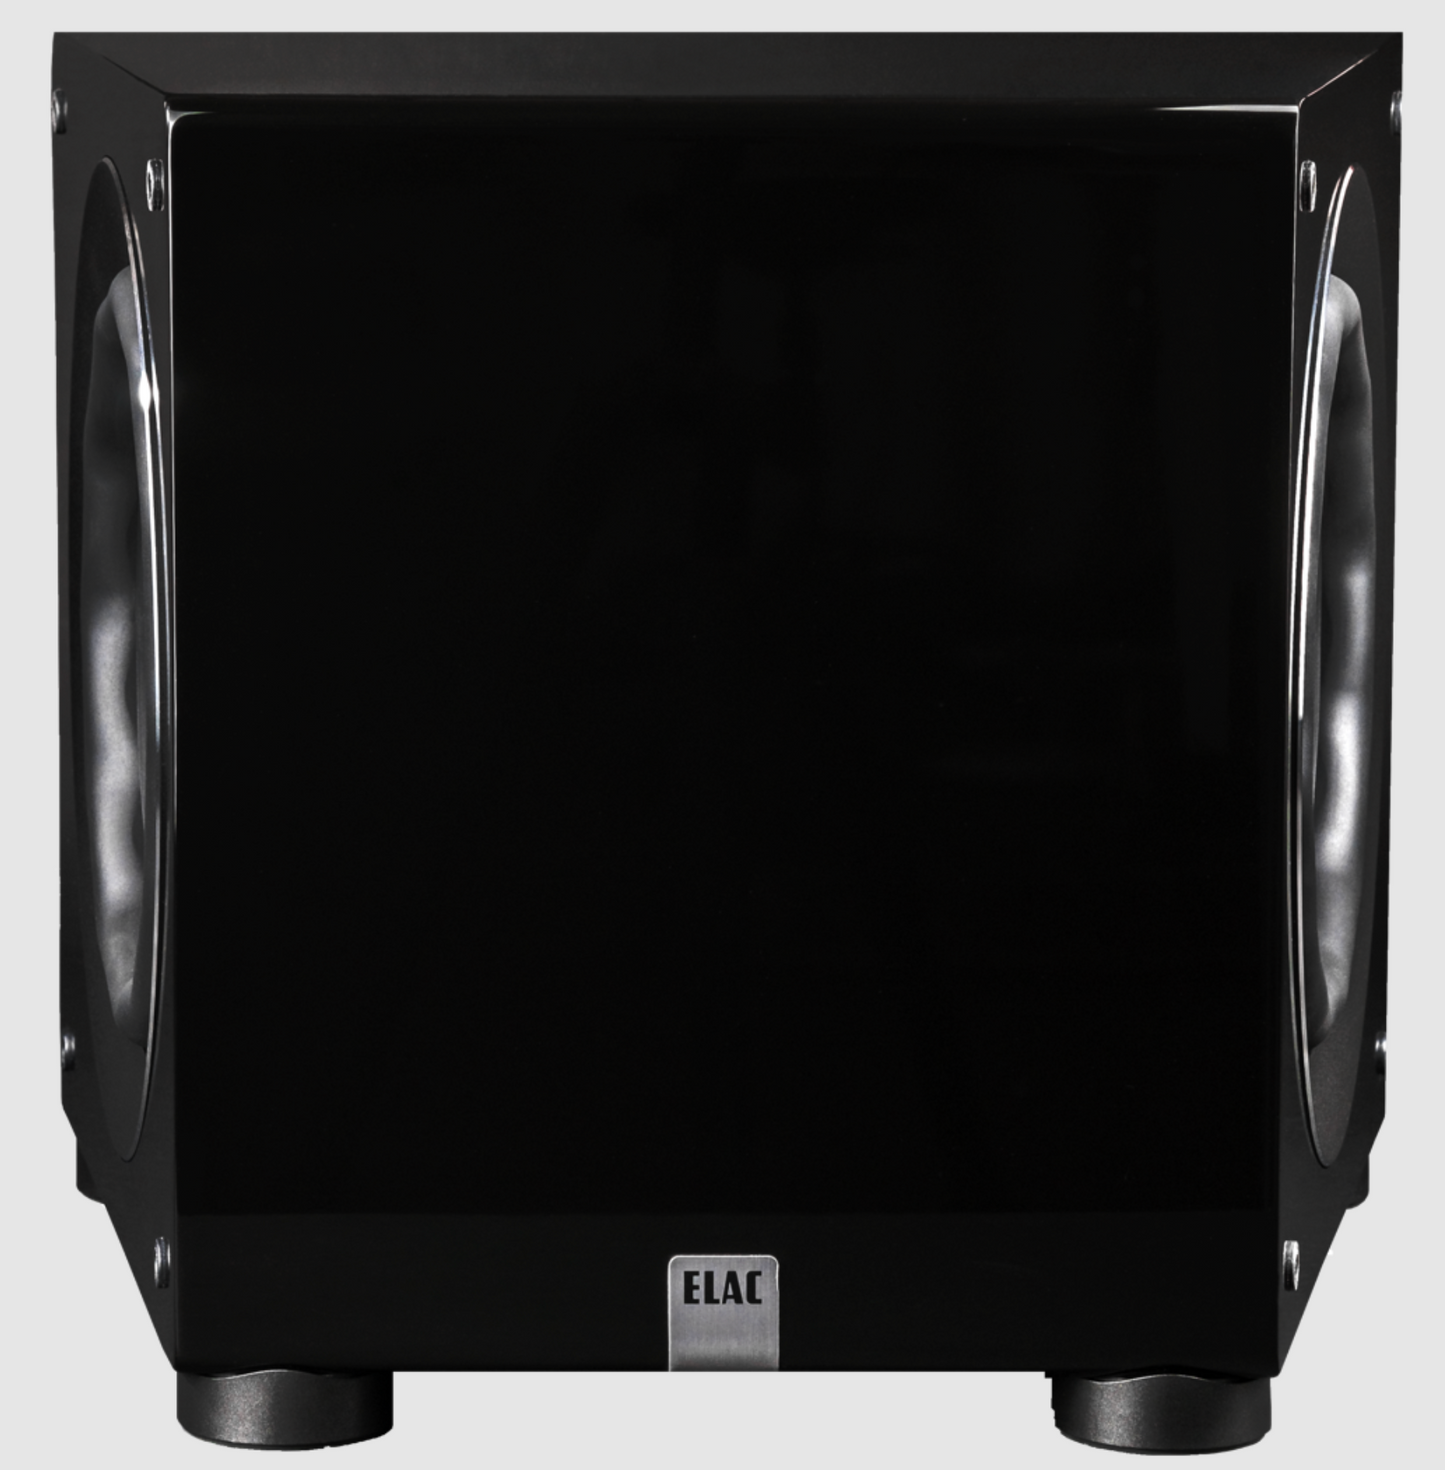 ELAC Varro DS1000 Dual Reference 10 Inch Subwoofer, front image without grille